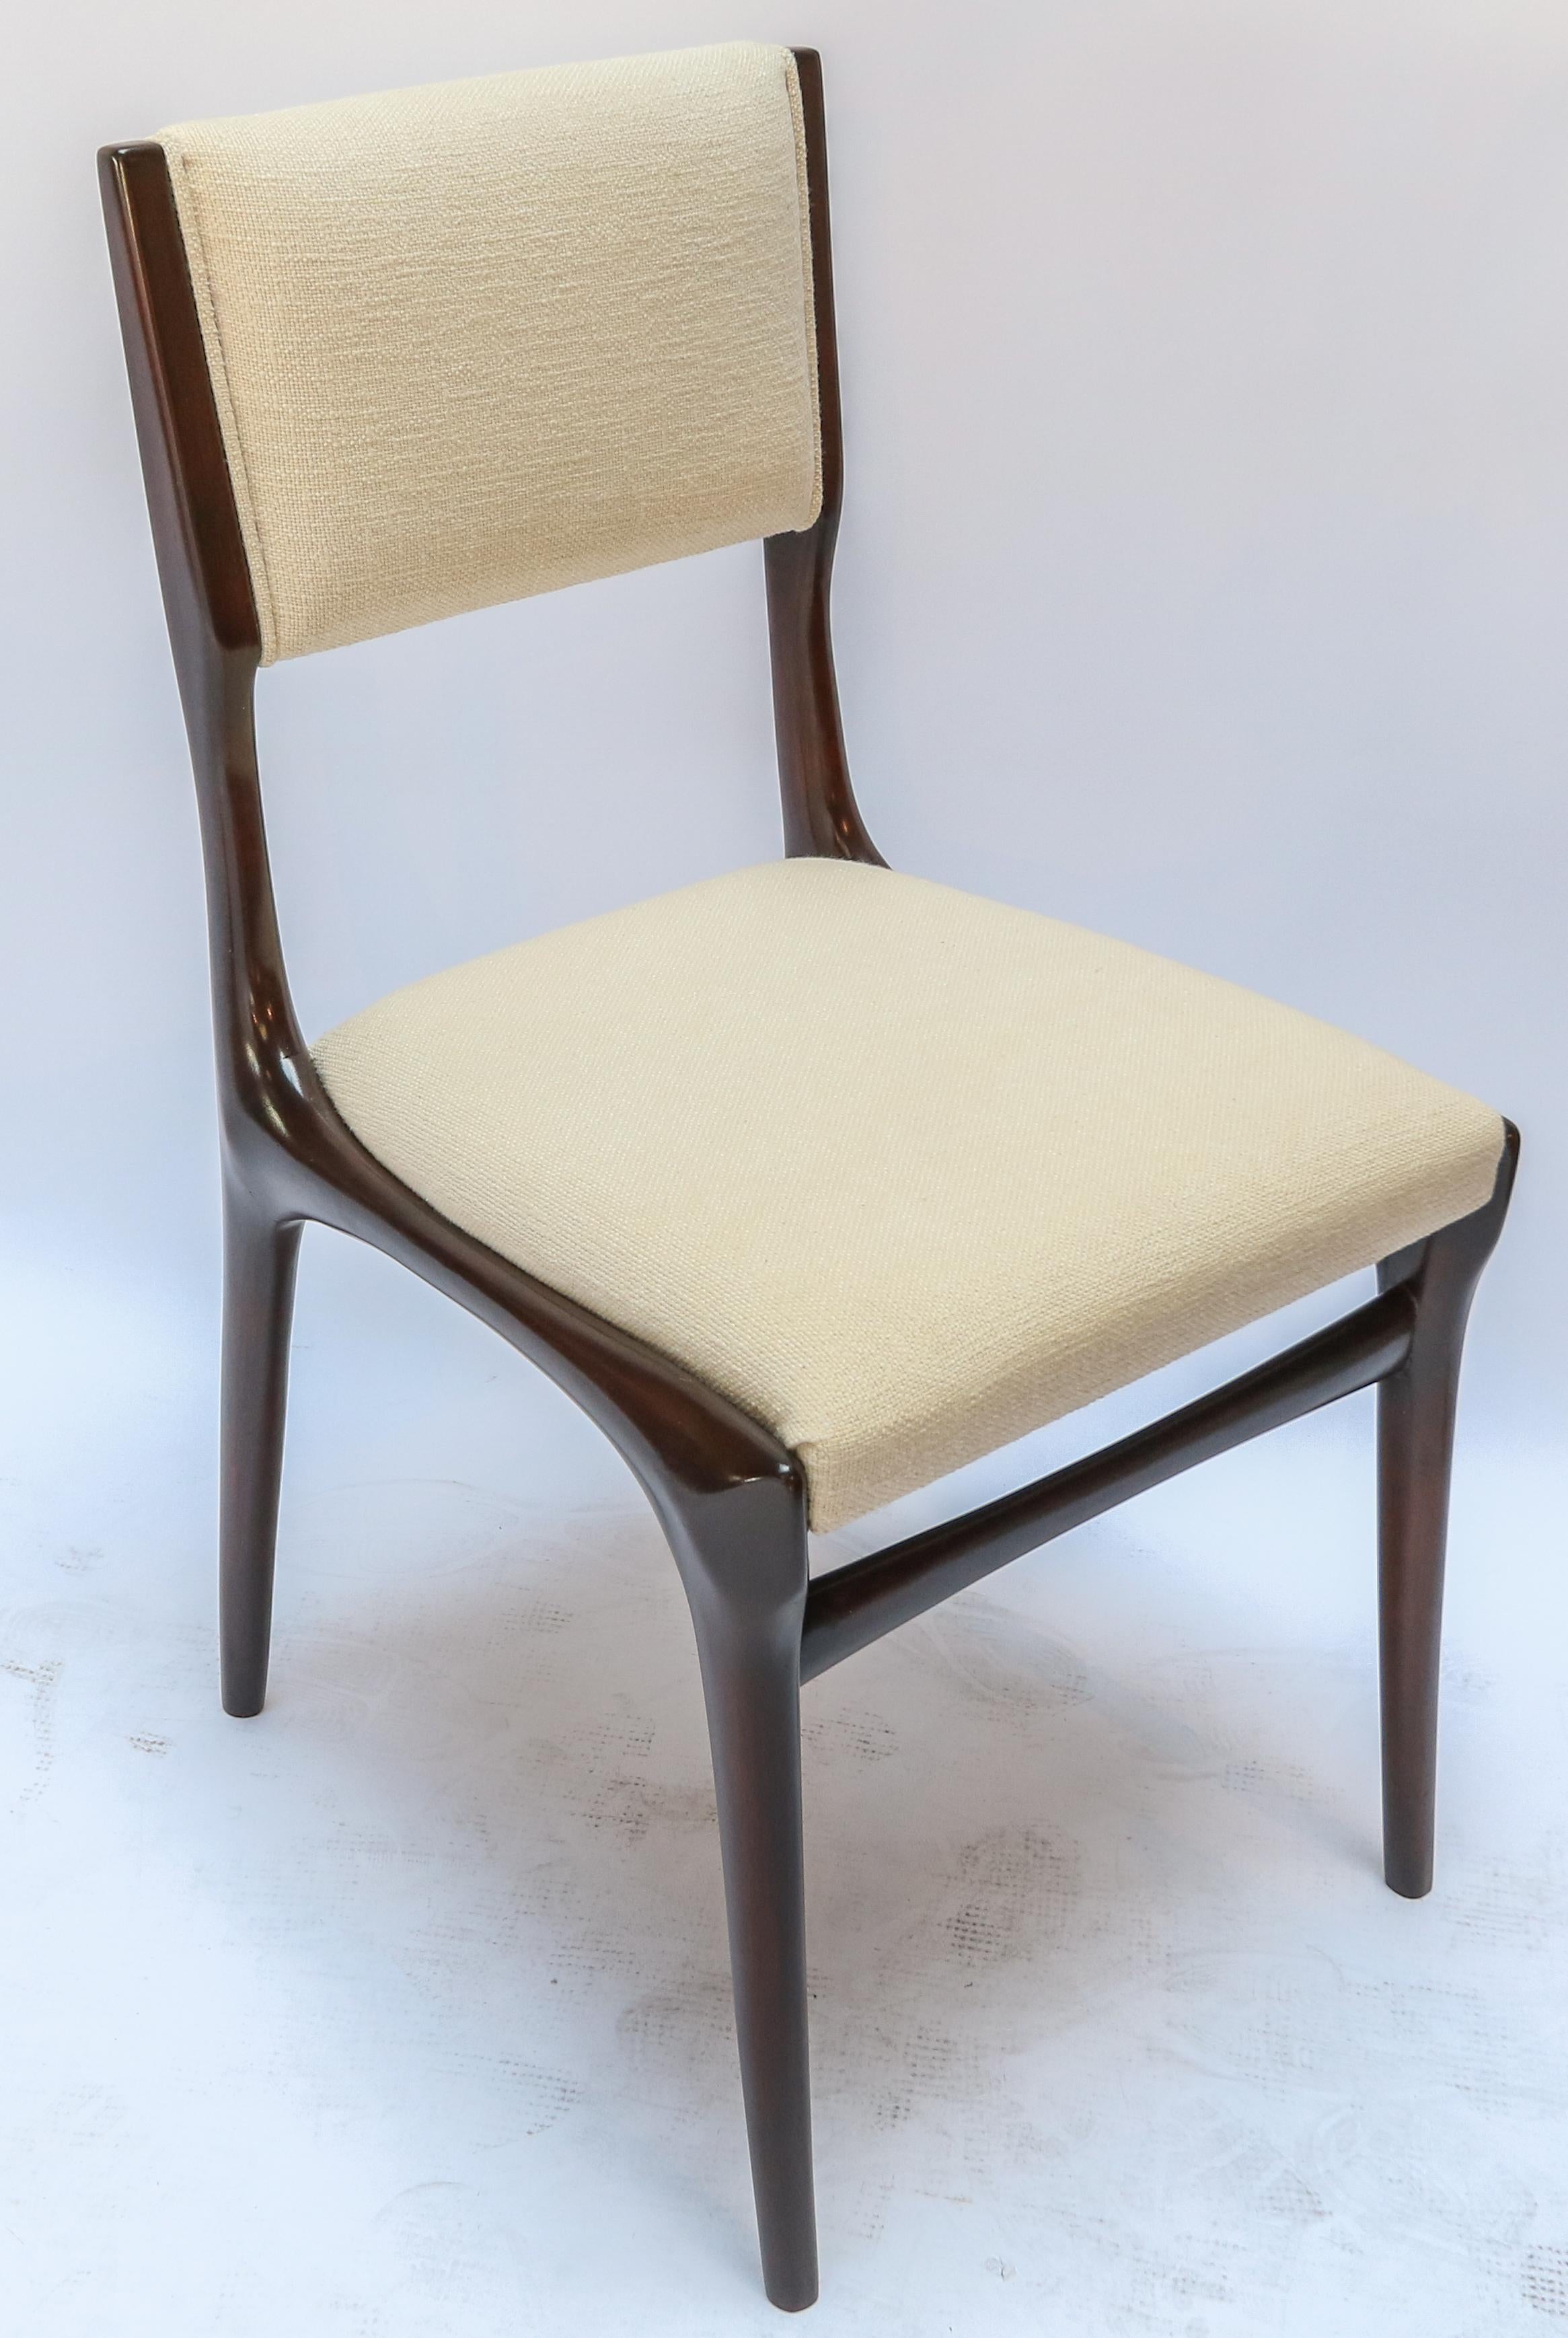 Set of 12 Carlo de Carli wood dining chairs from the 1950s in a lovely brown finish upholstered in ivory / beige linen.